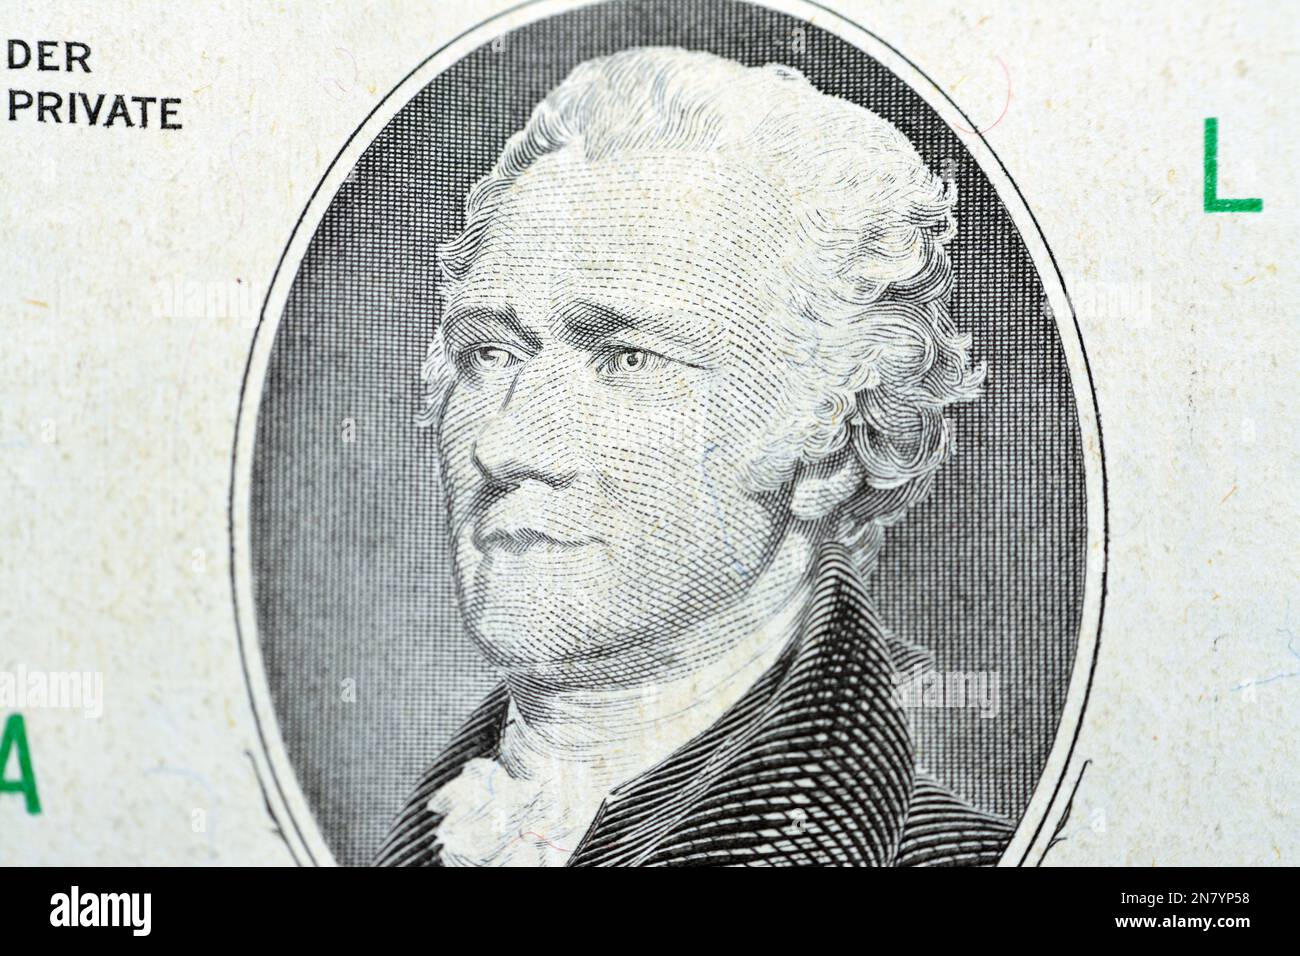 The portrait of Alexander Hamilton, who served as the first U.S. Secretary of the Treasury from the obverse side of old 10 $ ten American dollars bill Stock Photo